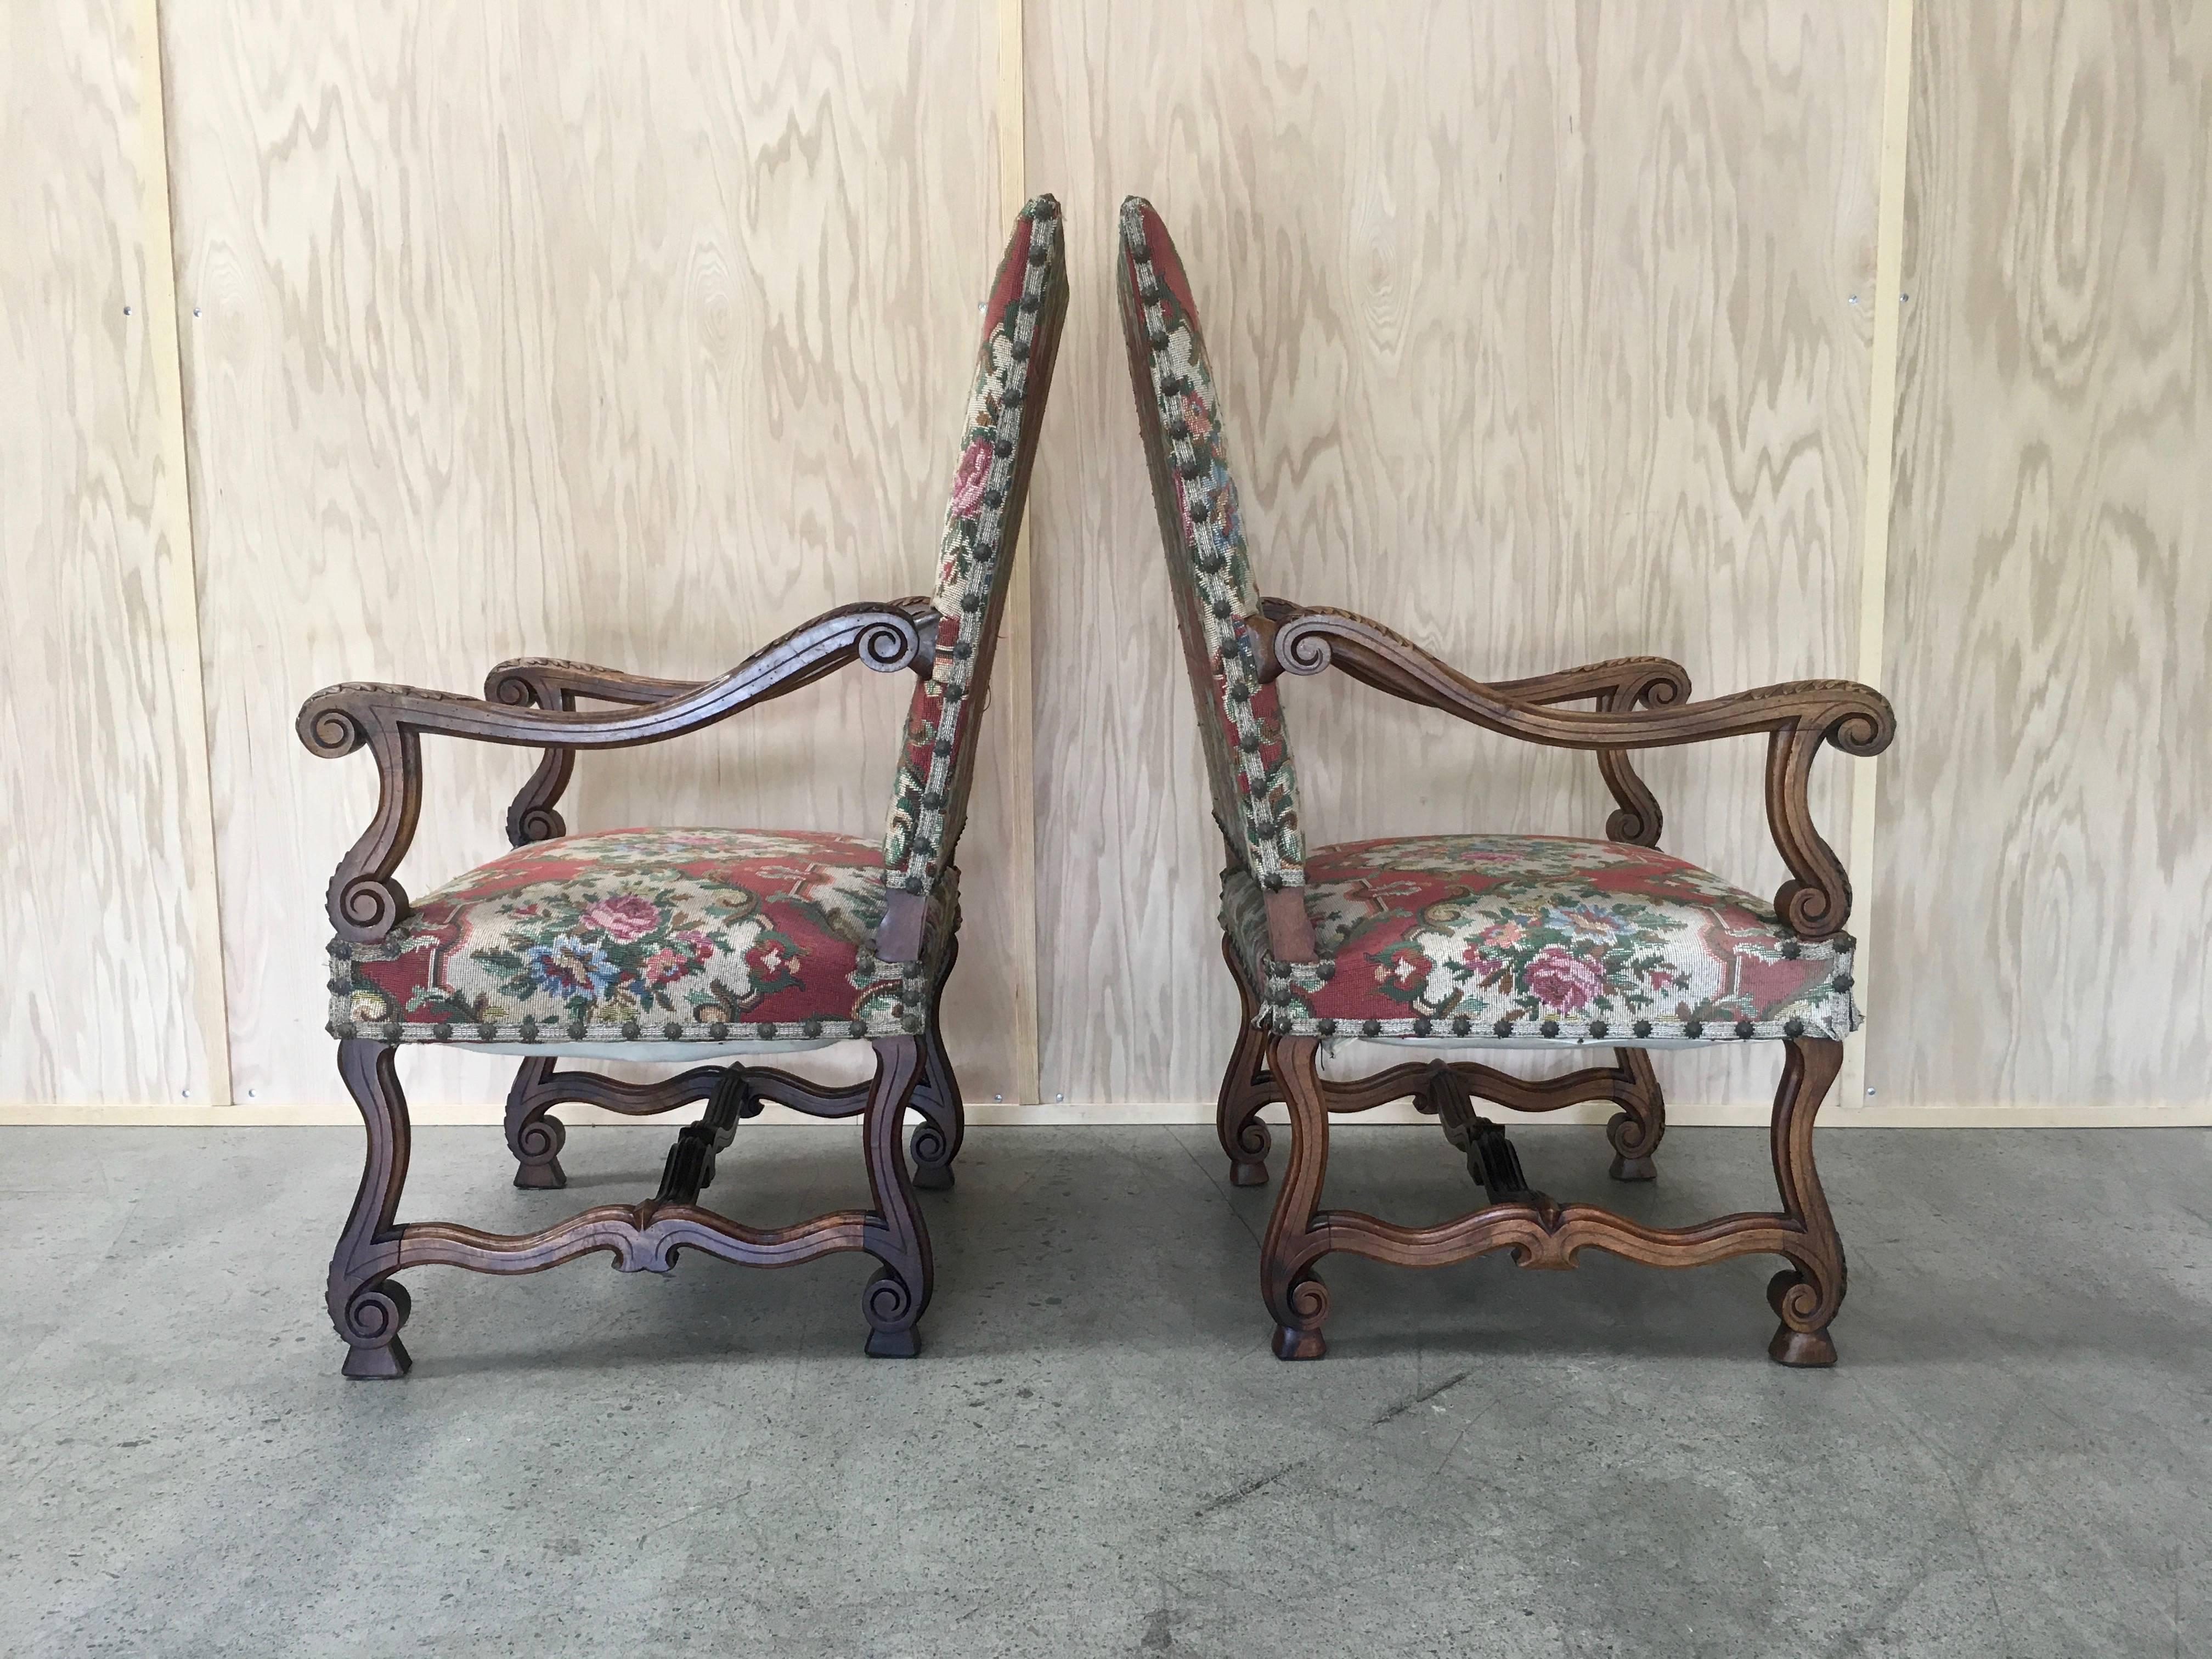 Antique 19th century pair of Louis XIV style arm chairs with needle work upholstery 
in French walnut.